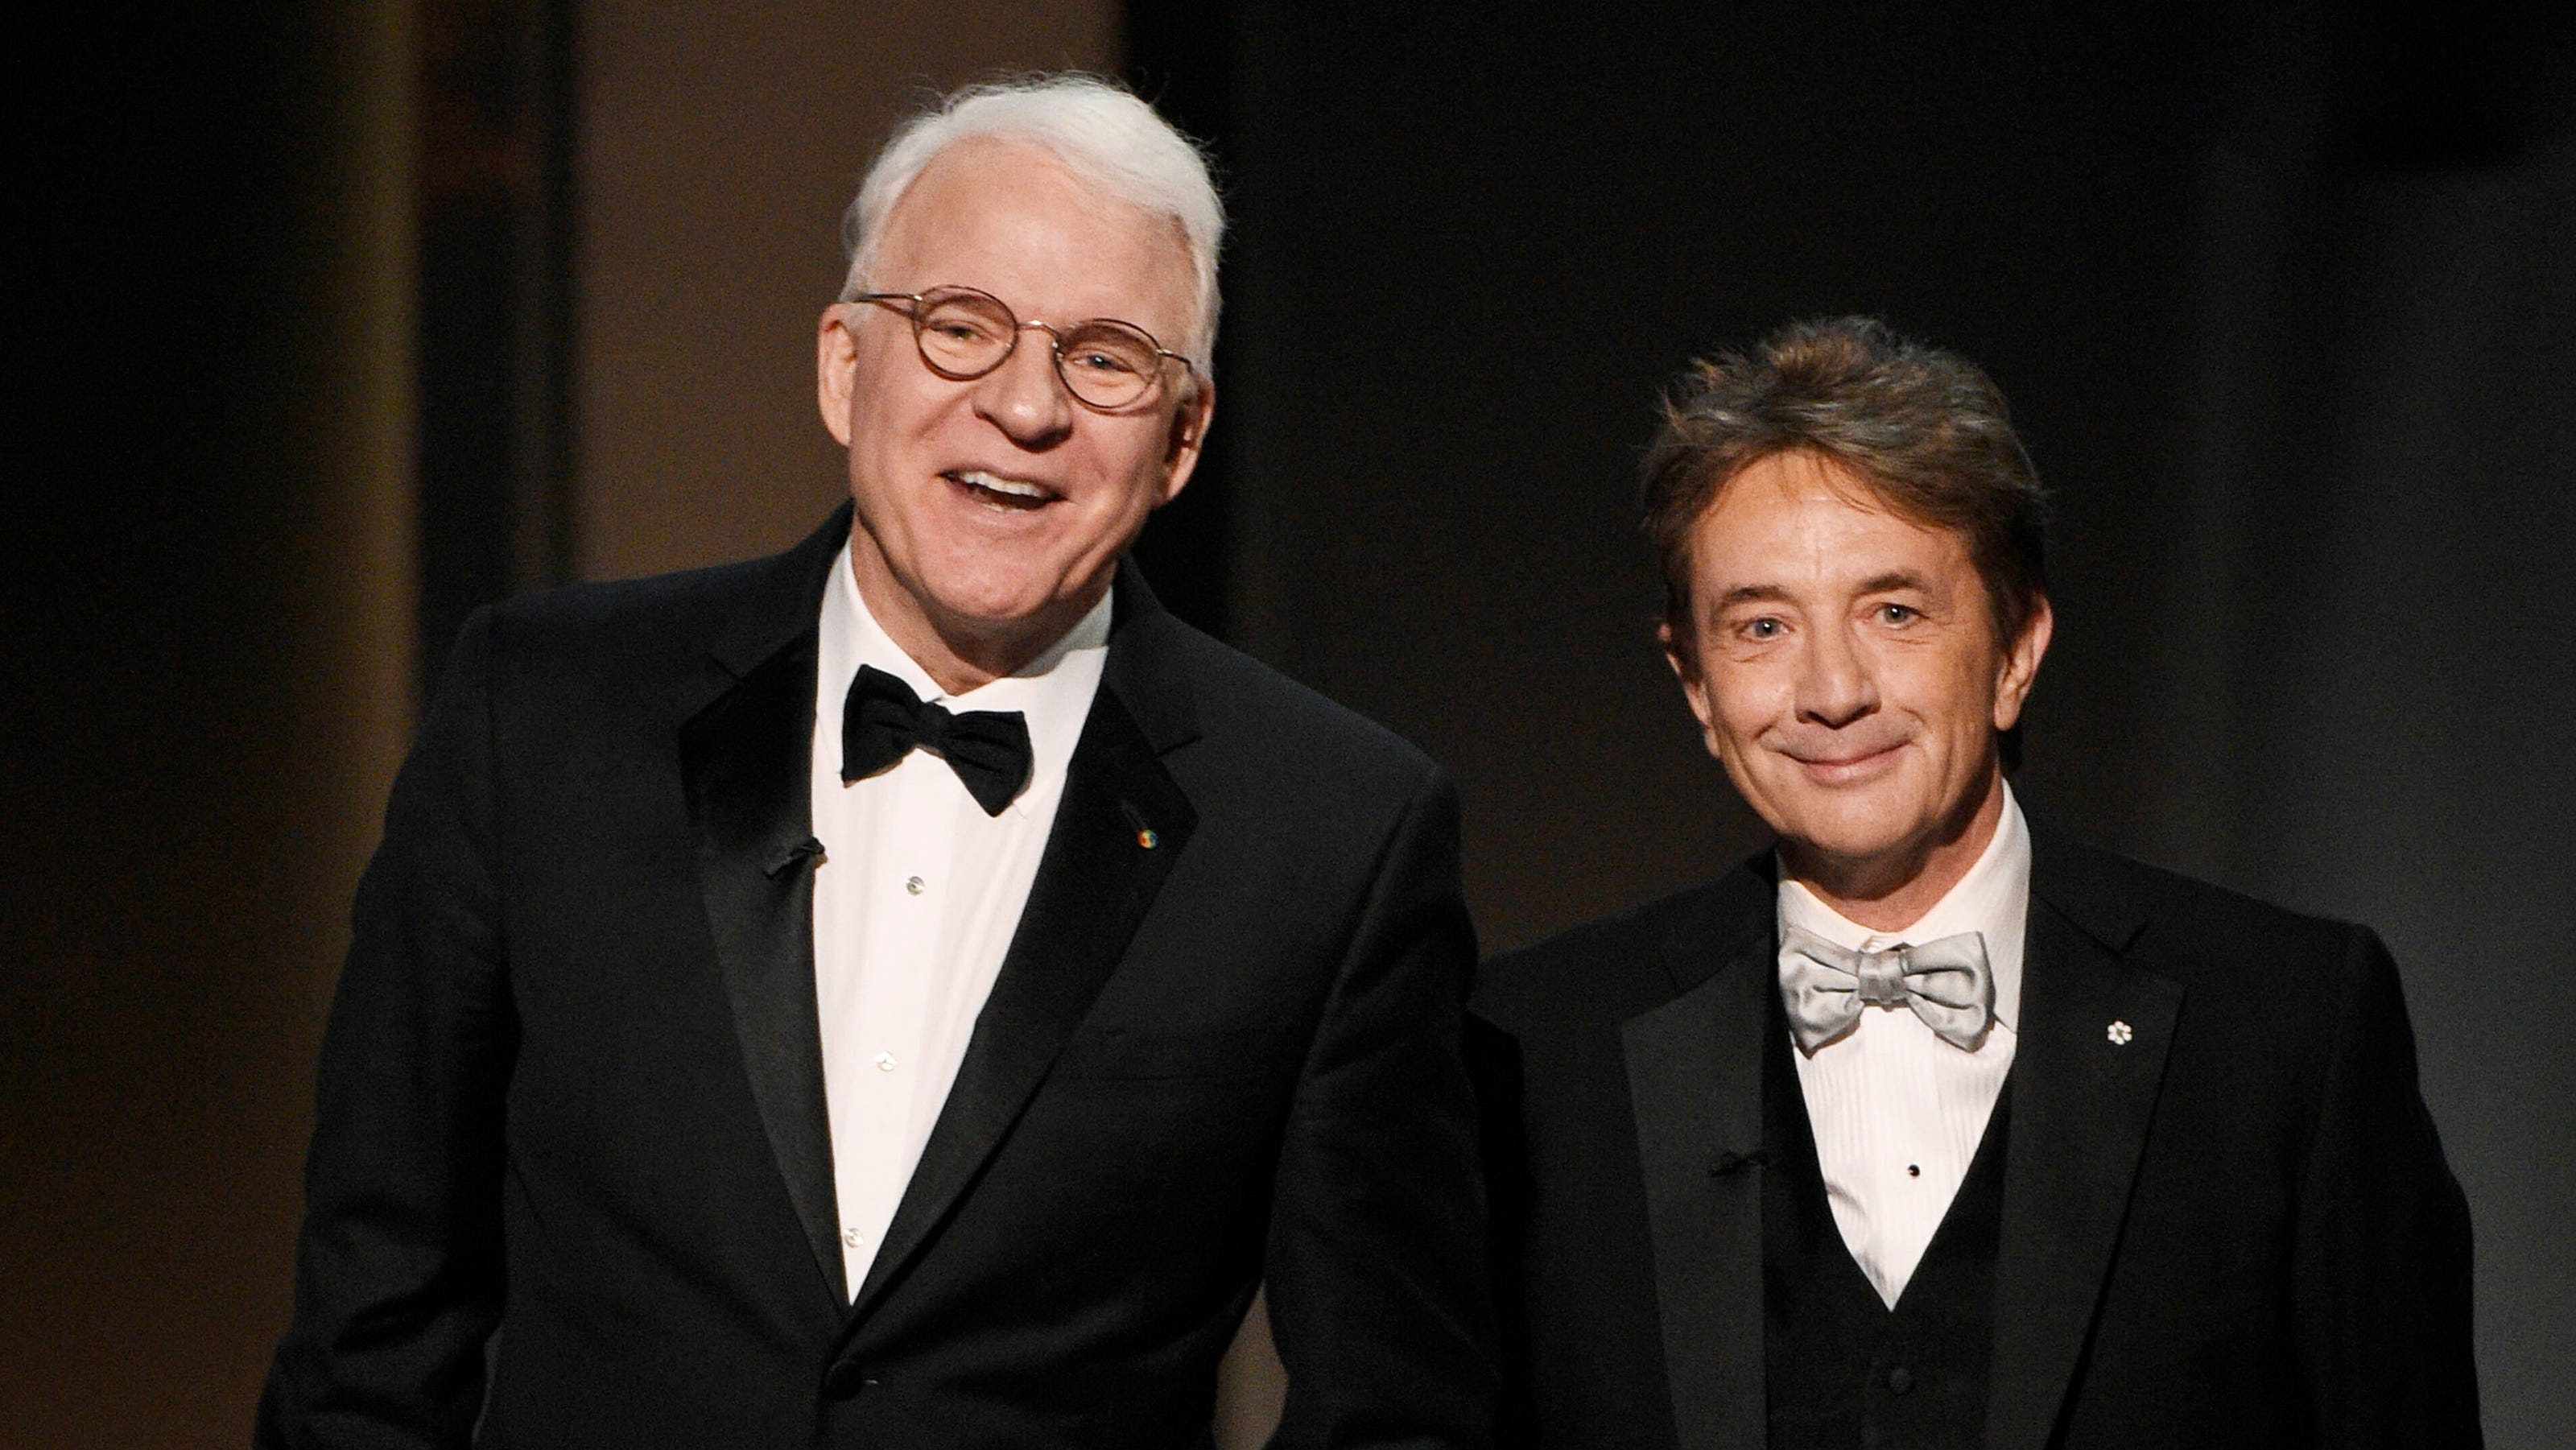 Steve Martin And Martin Short To Star In Hulu Comedy Series